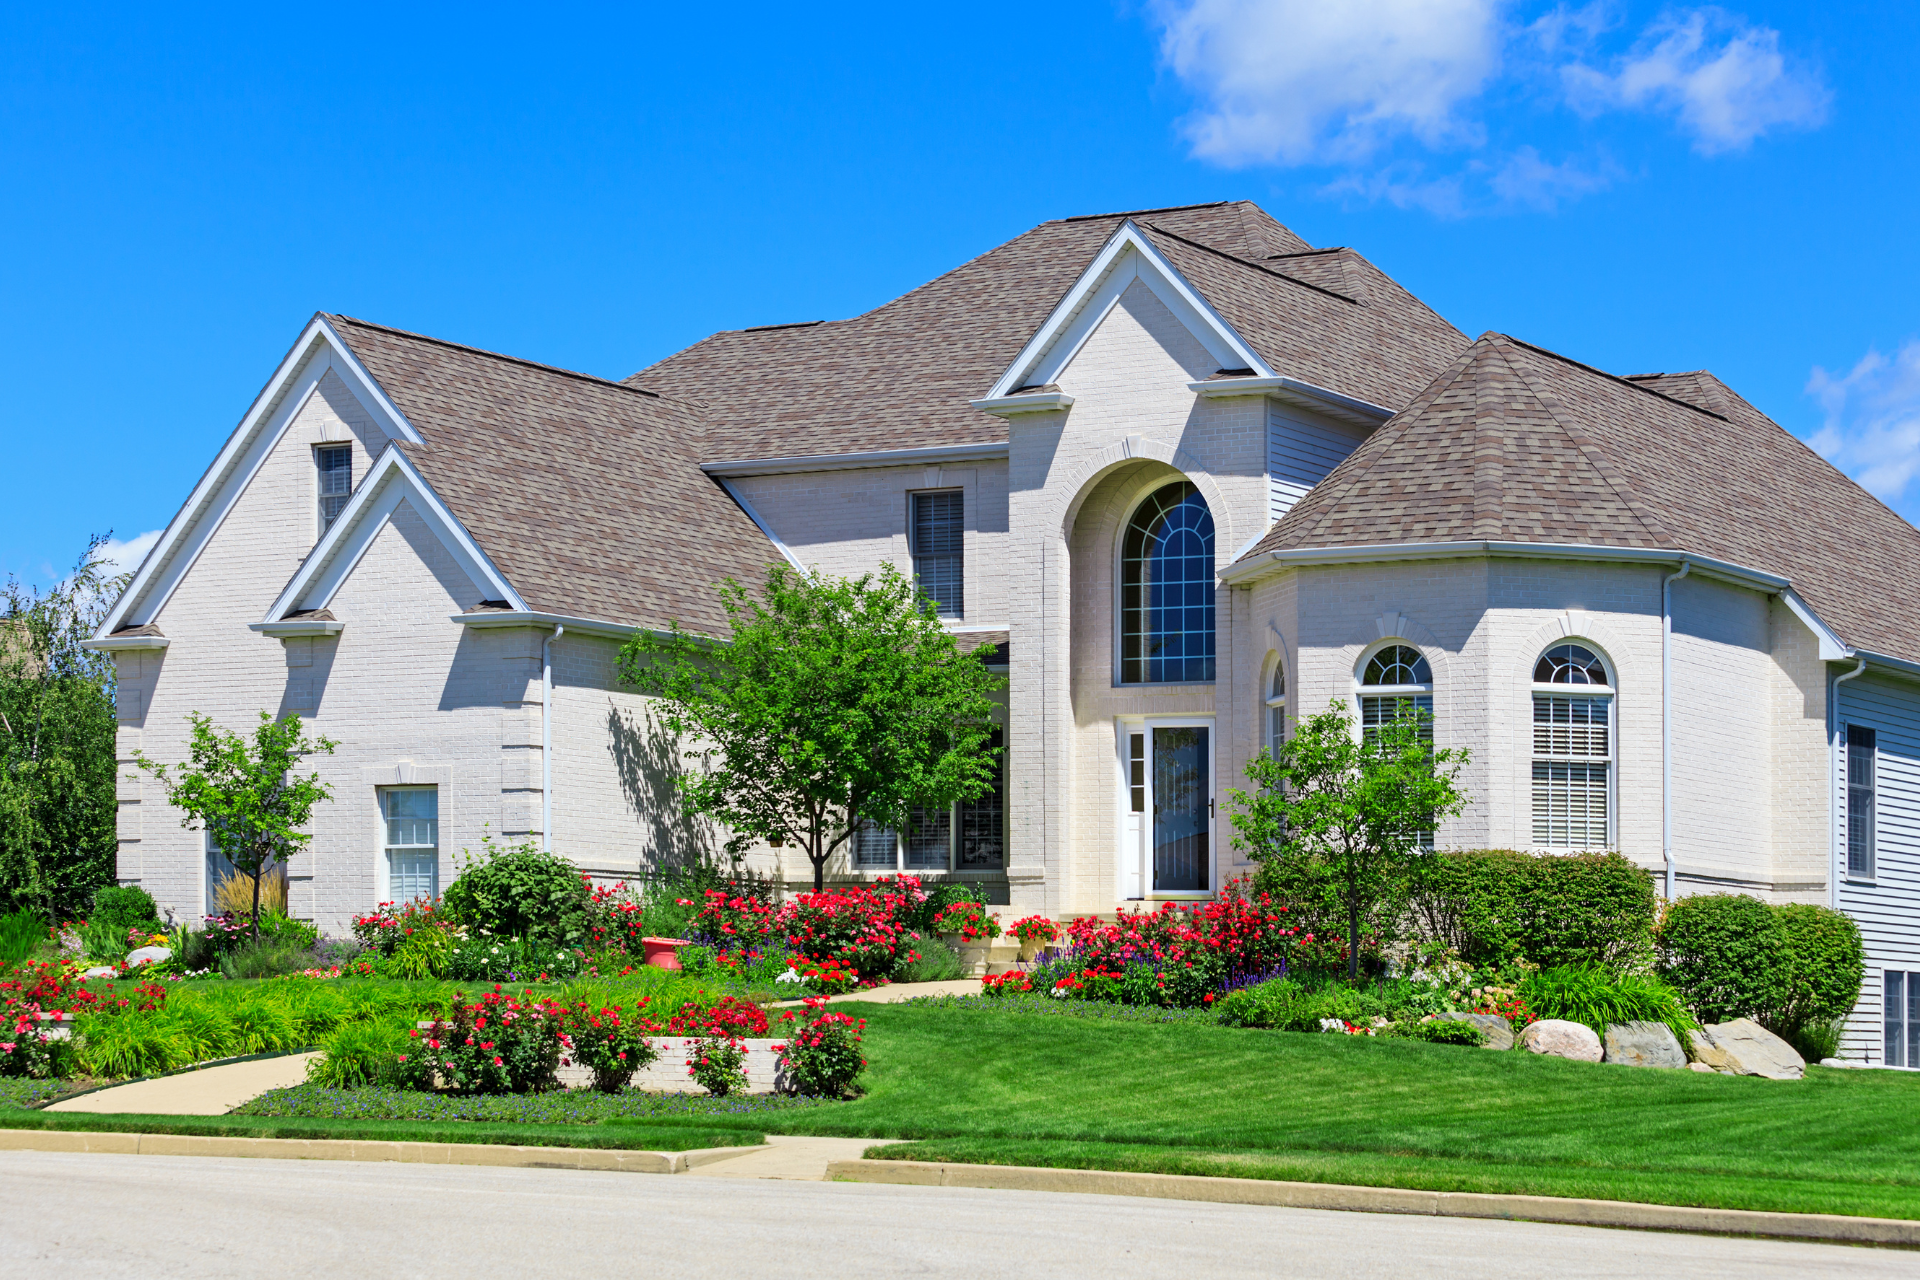 a home with great landscaping